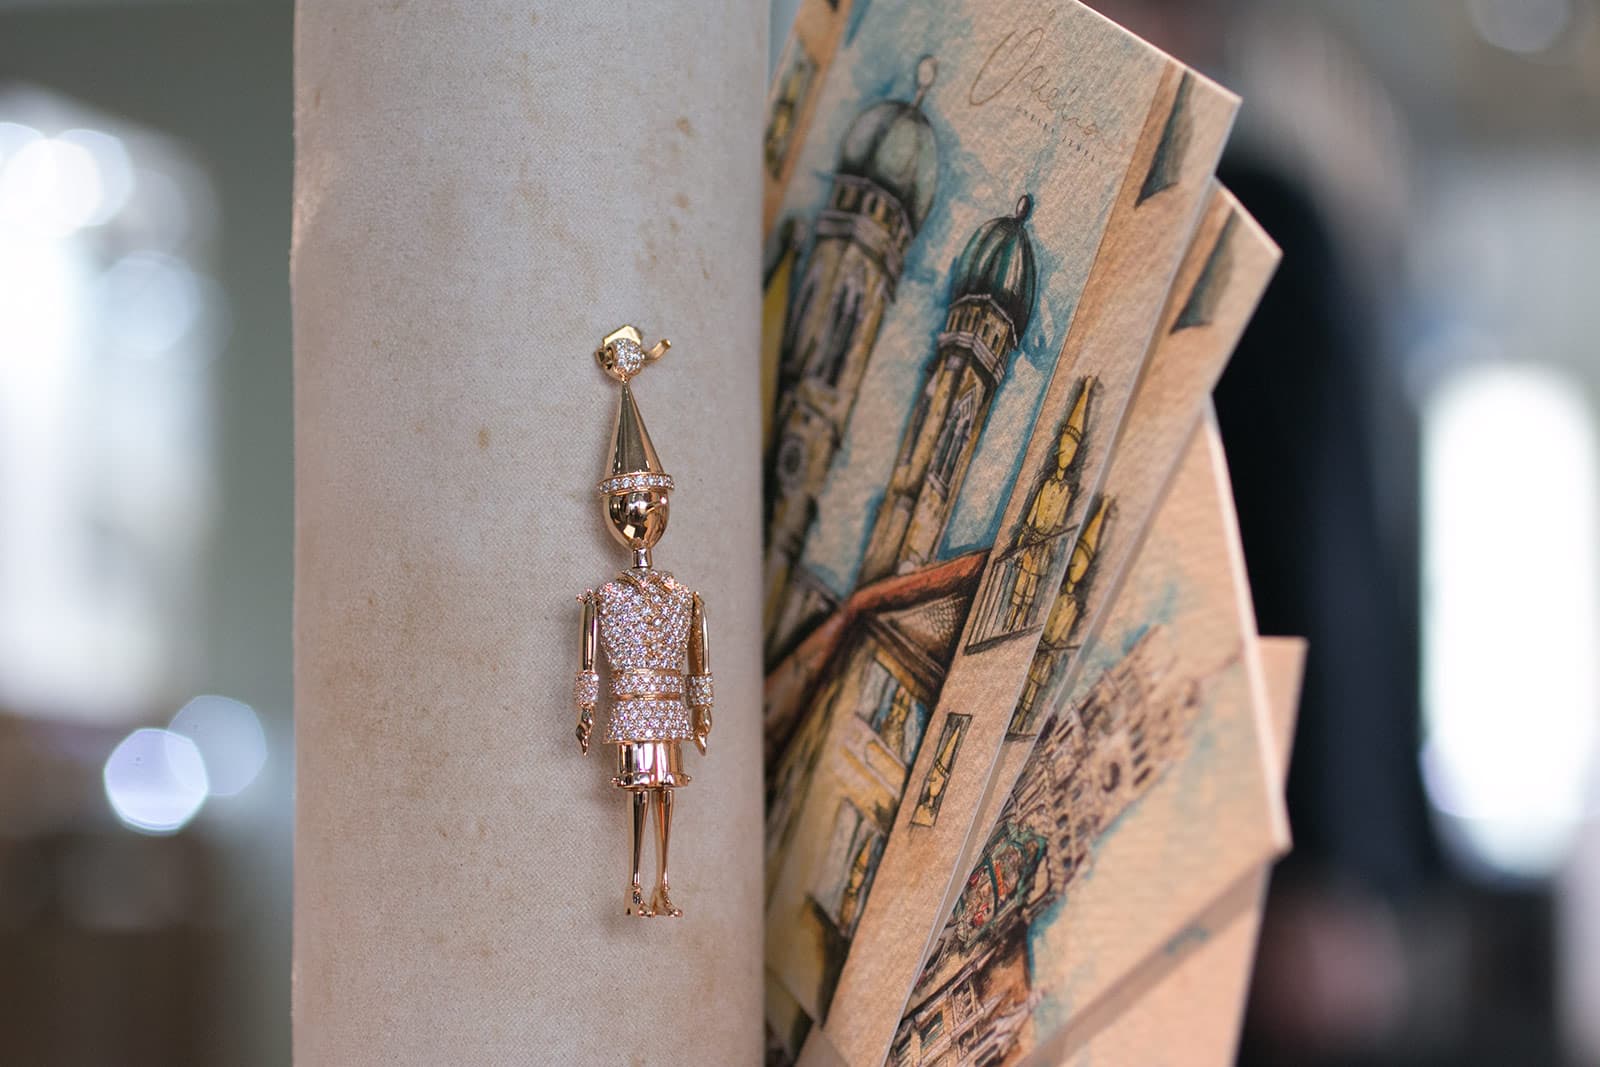 Oneira Pinocchio pendant with diamonds in yellow gold and wood